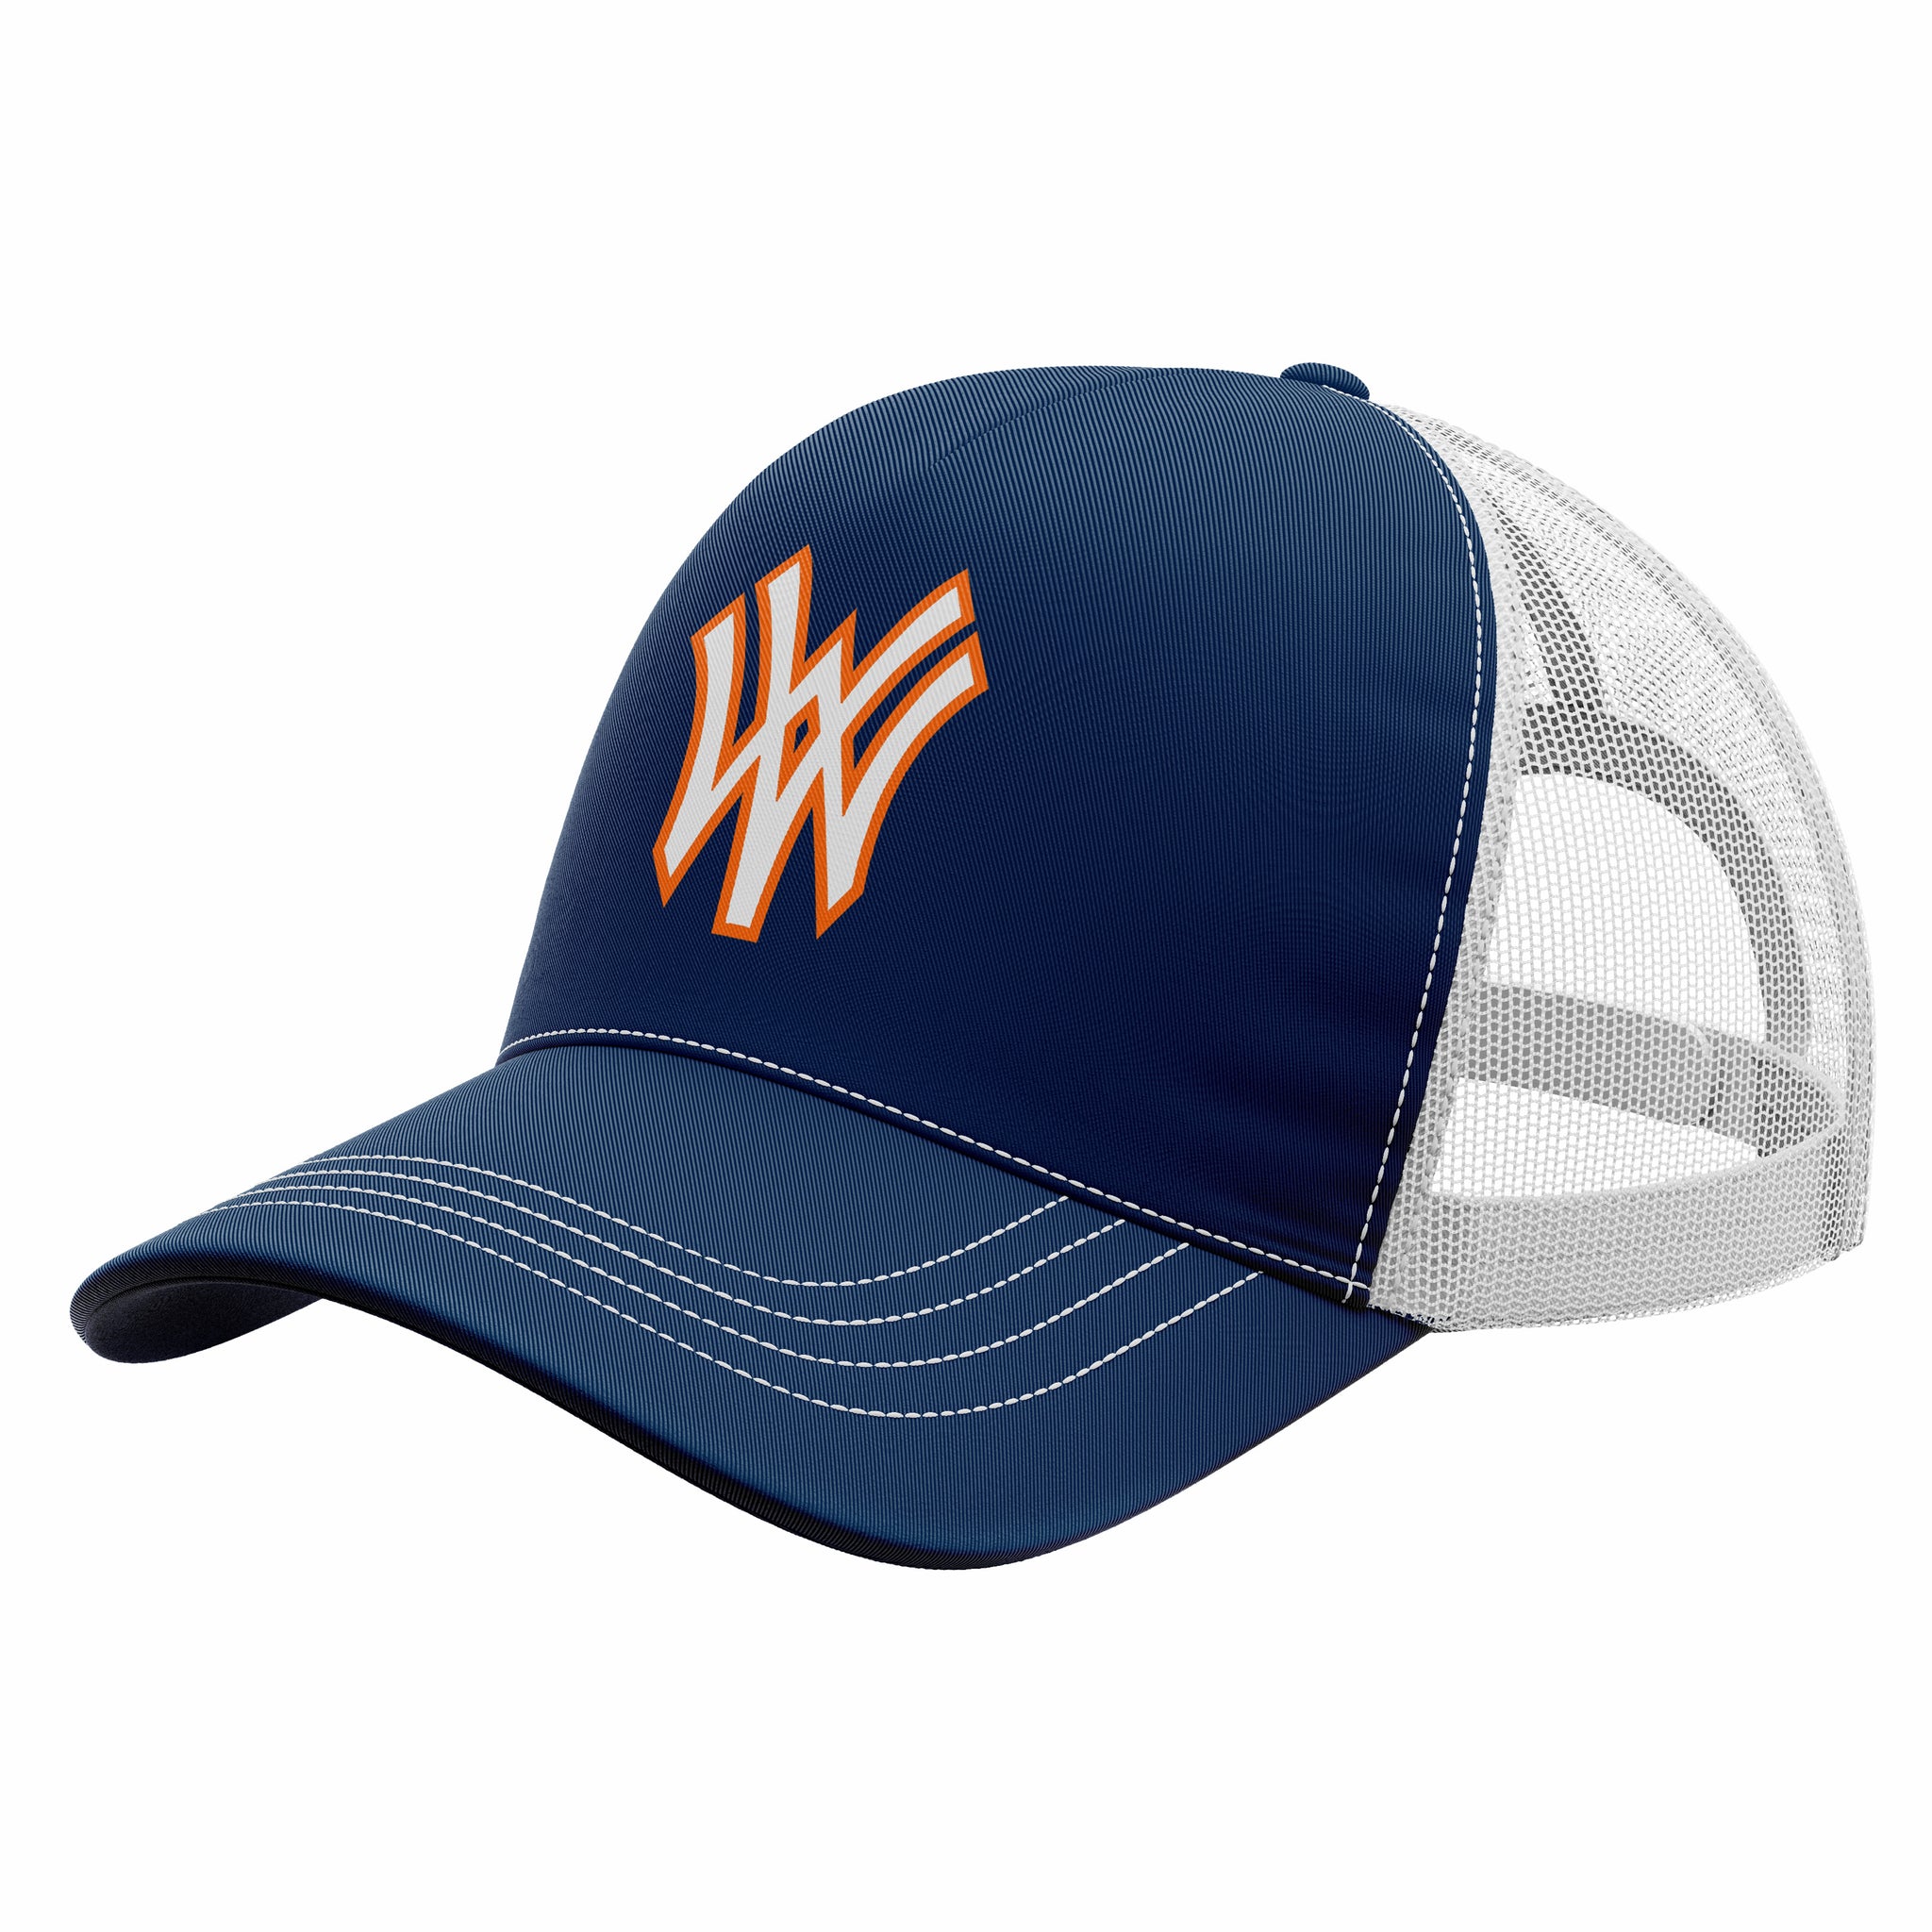 WEST VALLEY 112 SNAPBACK HAT